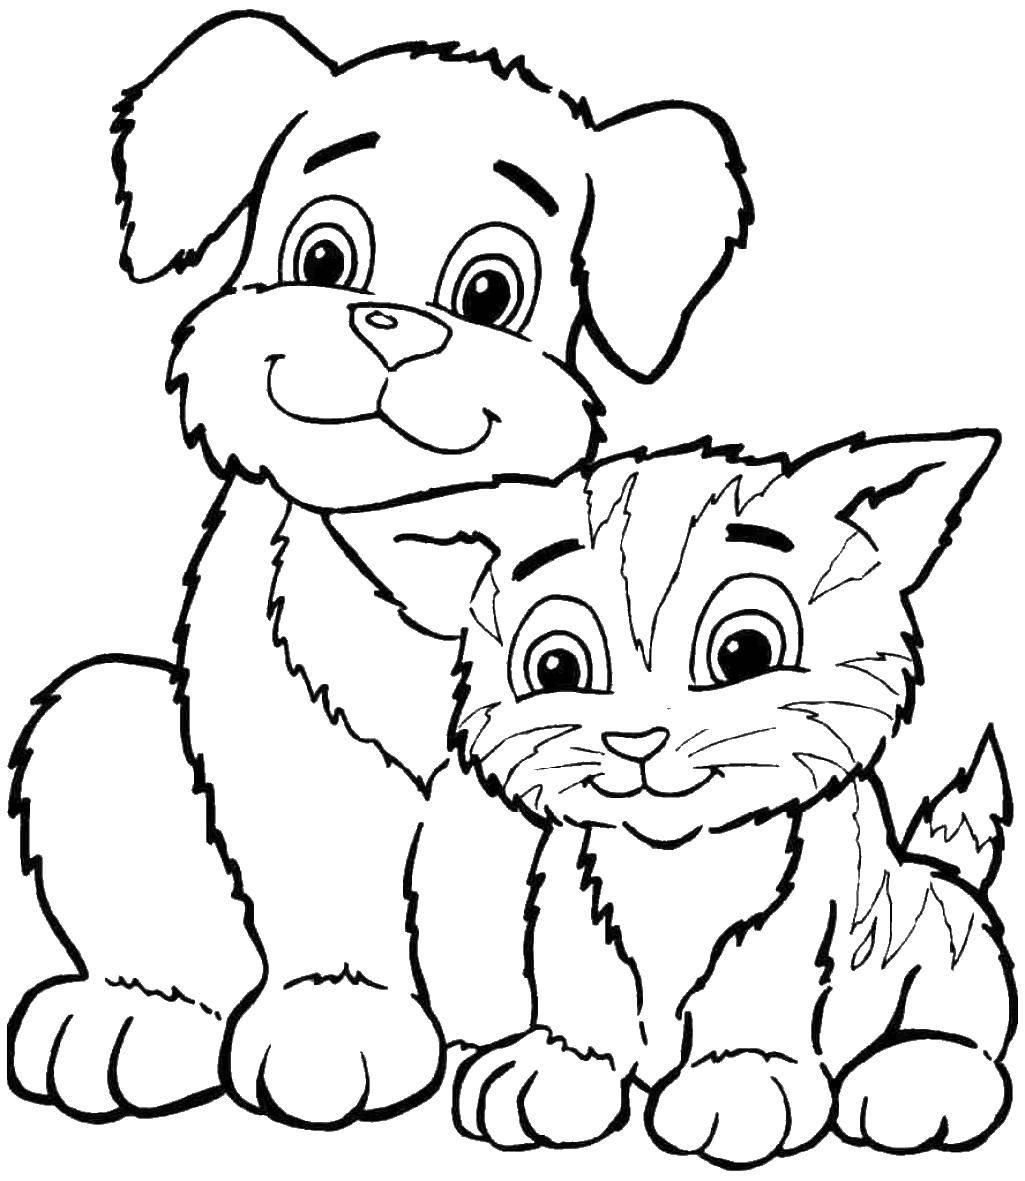 Coloring Puppy and kitty. Category Pets allowed. Tags:  puppy, kitten.